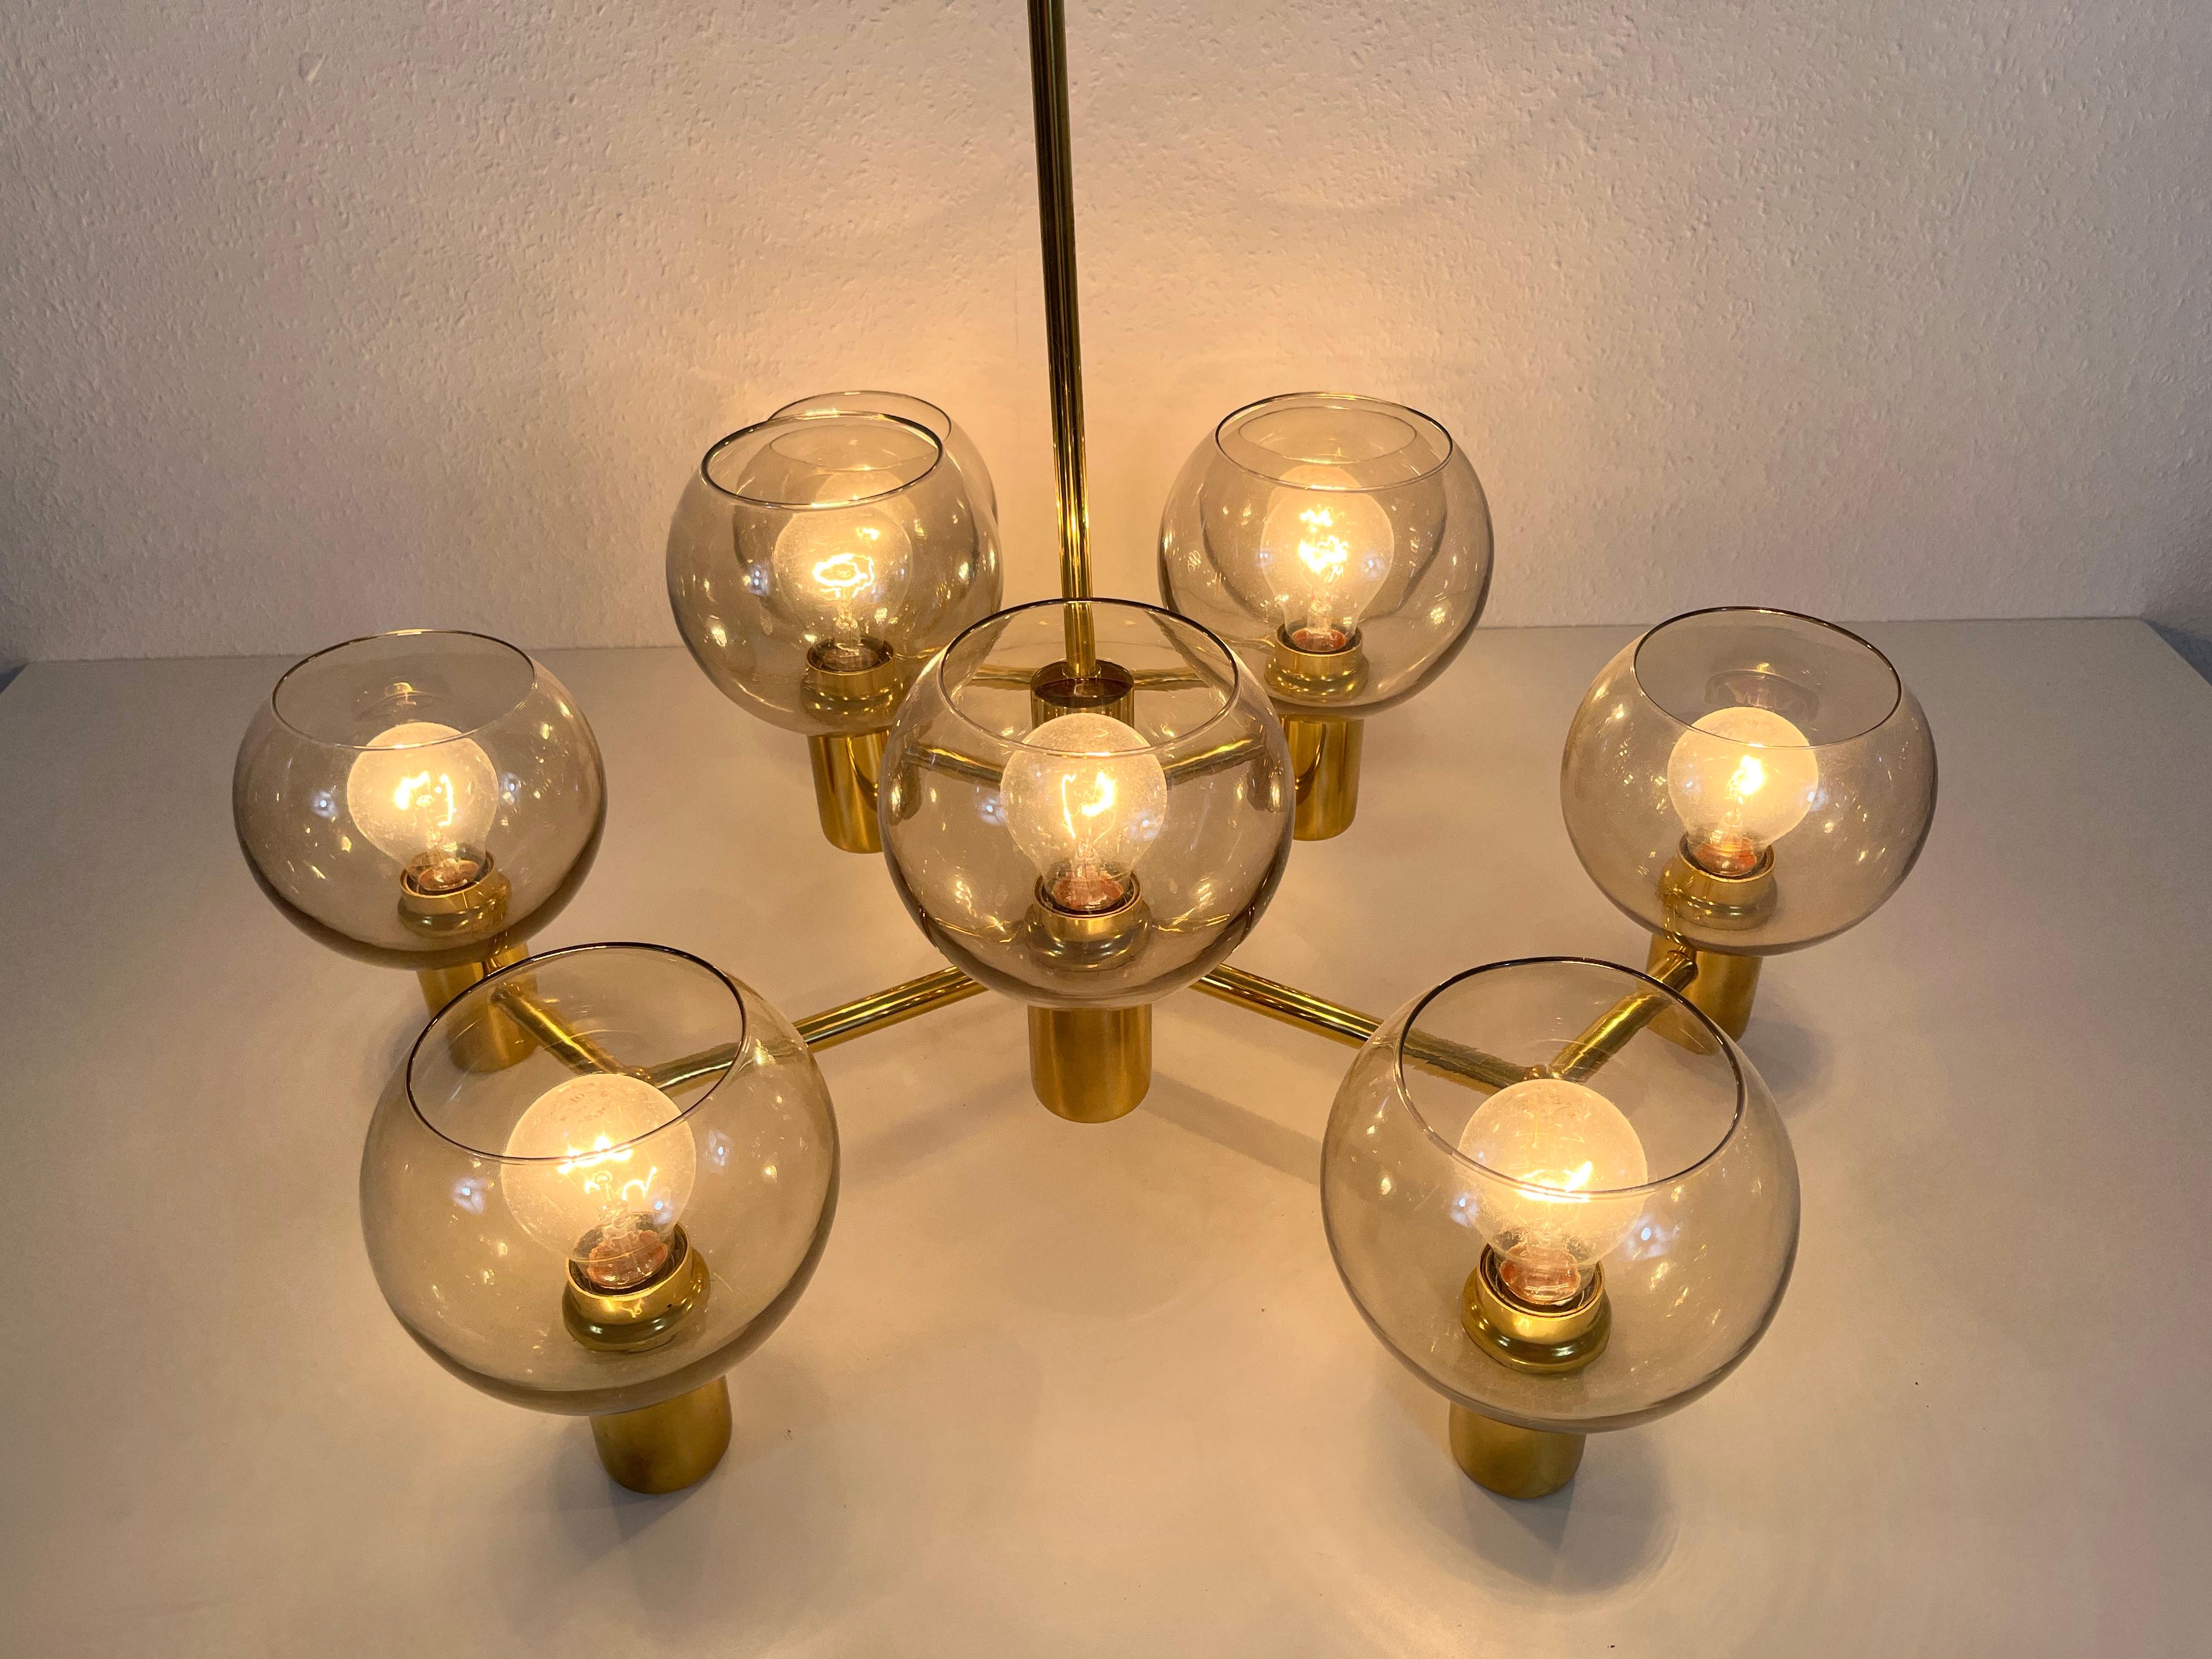 Monumental Swedish Mid-Century Modern Brass and Glass Chandelier, 1960s For Sale 6